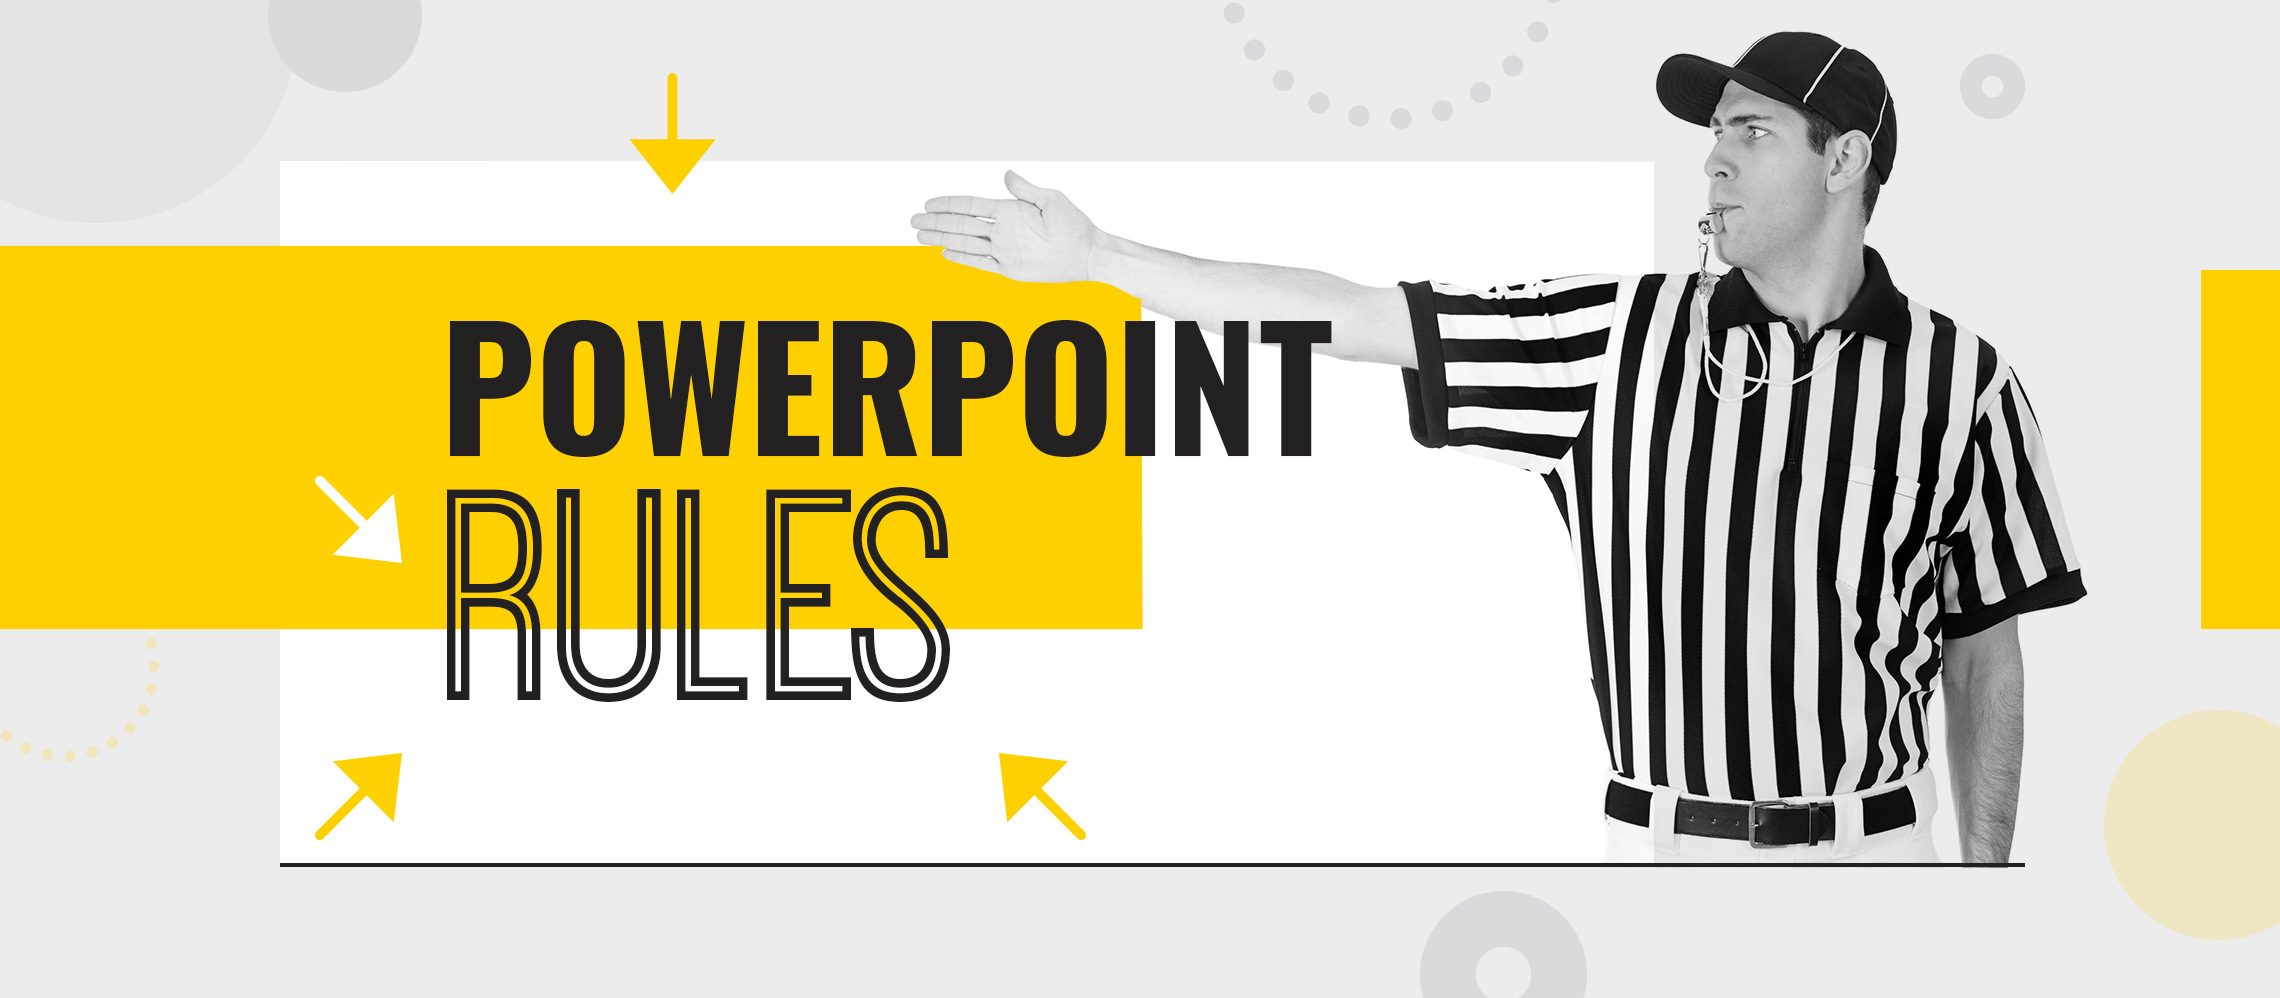 power point presentation rules